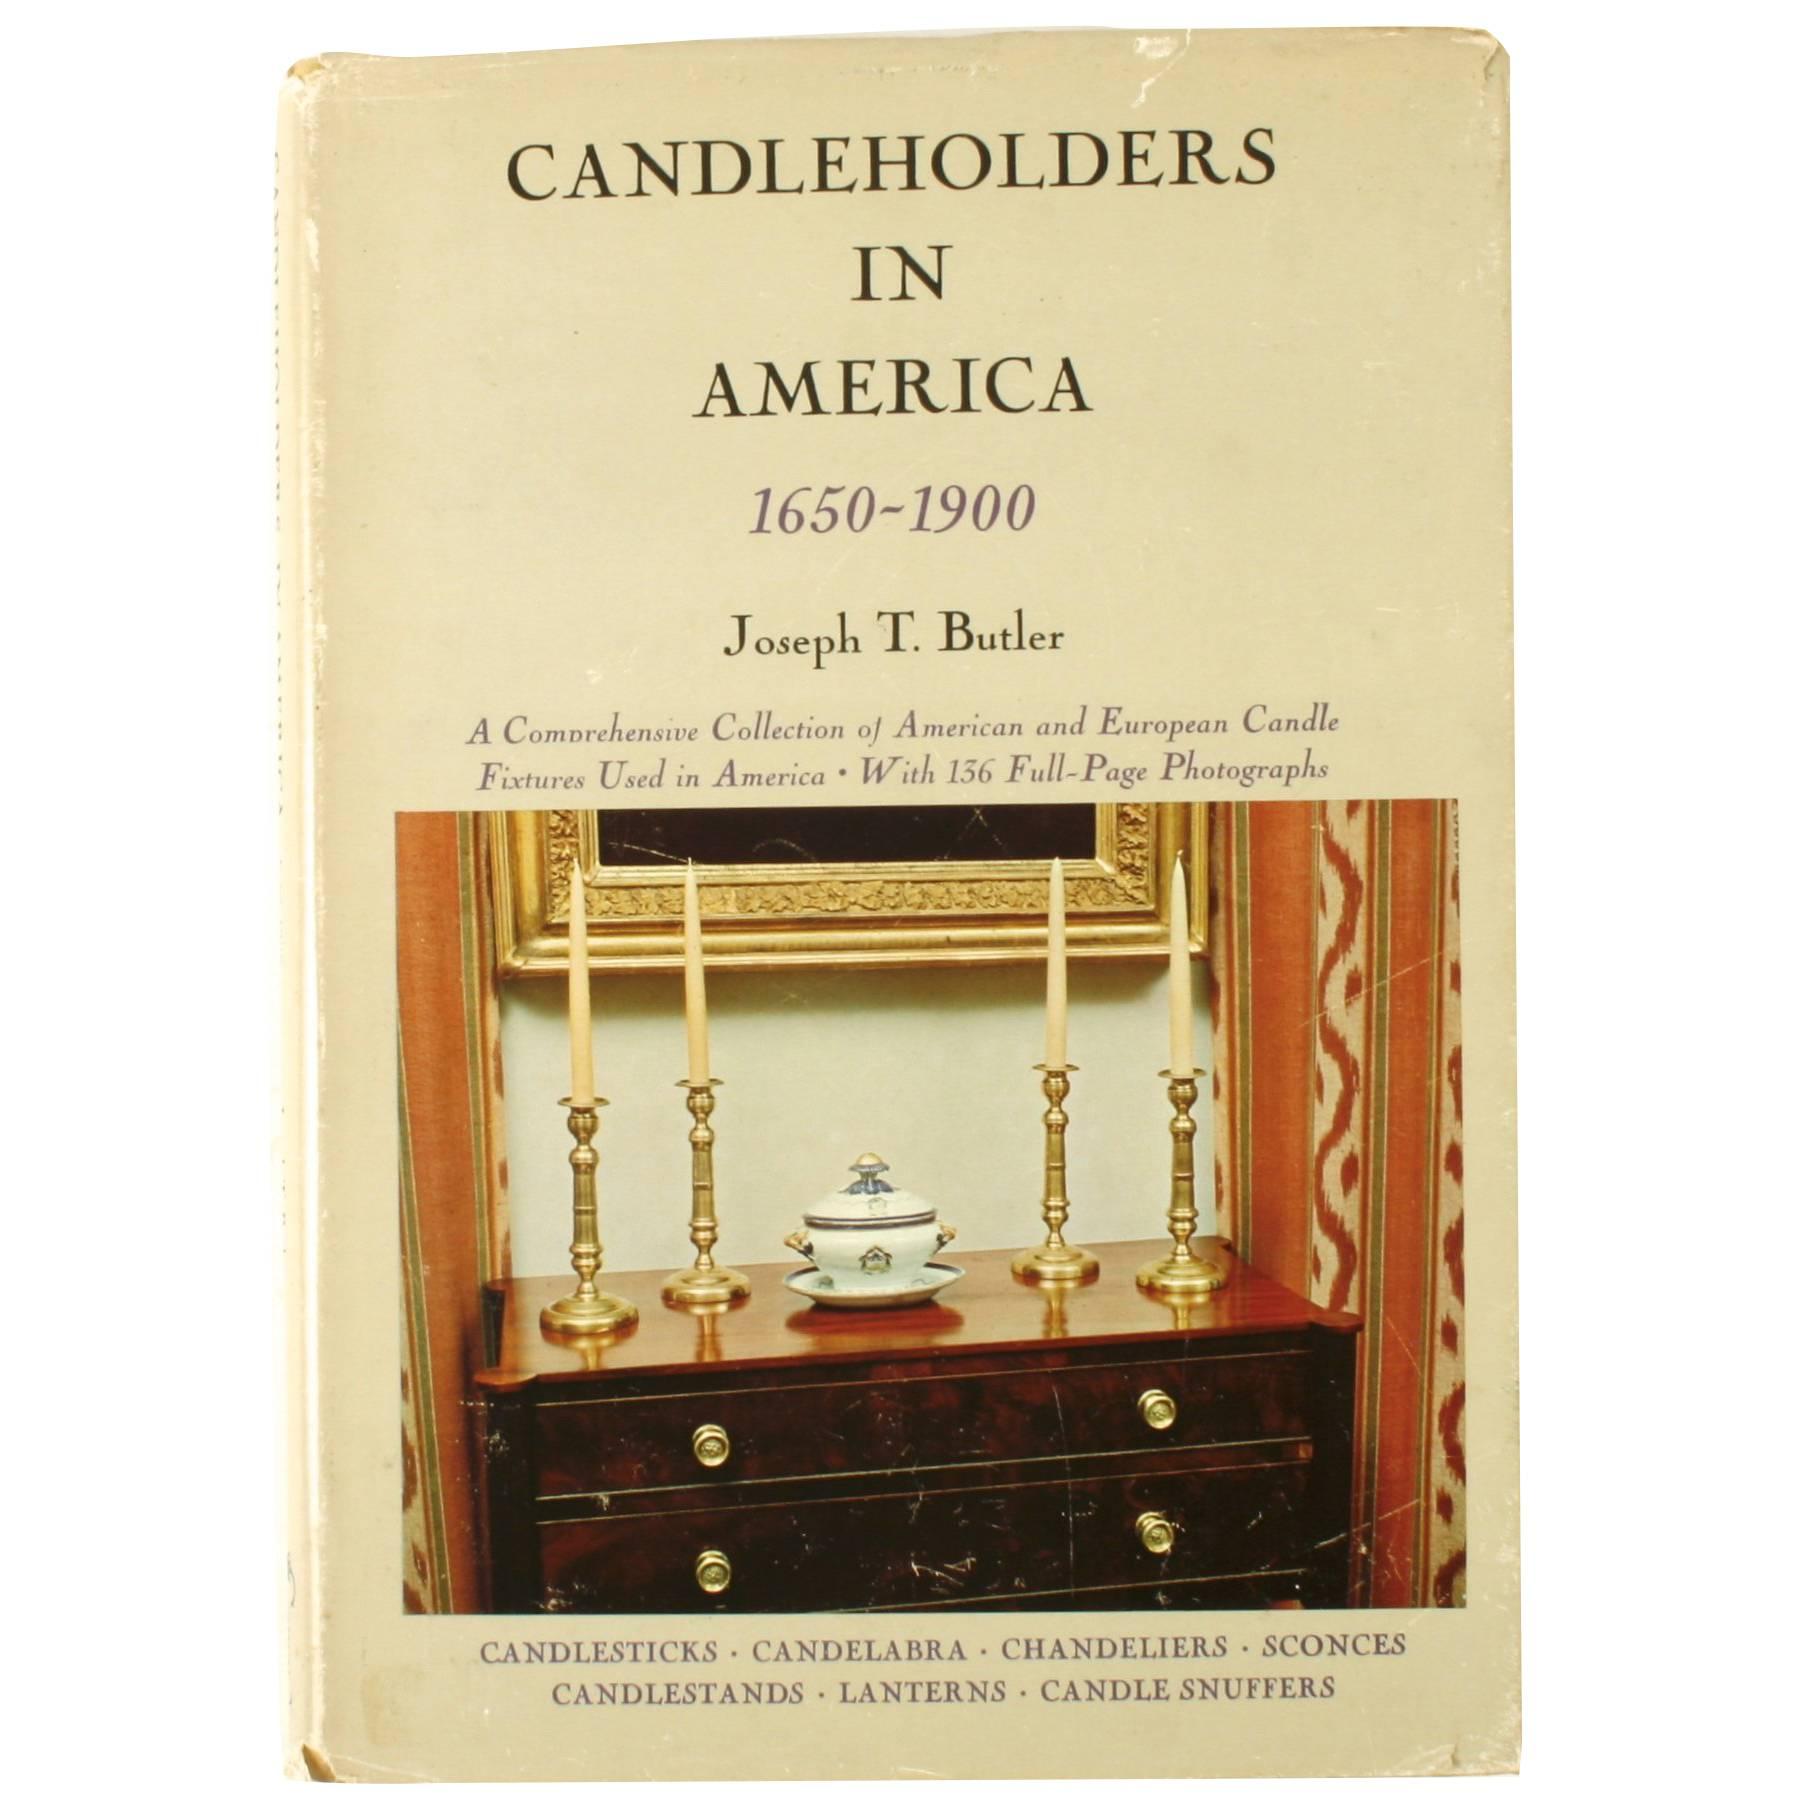 Candleholders in America by Joseph T. Butler 1650-1900, 1st Edition